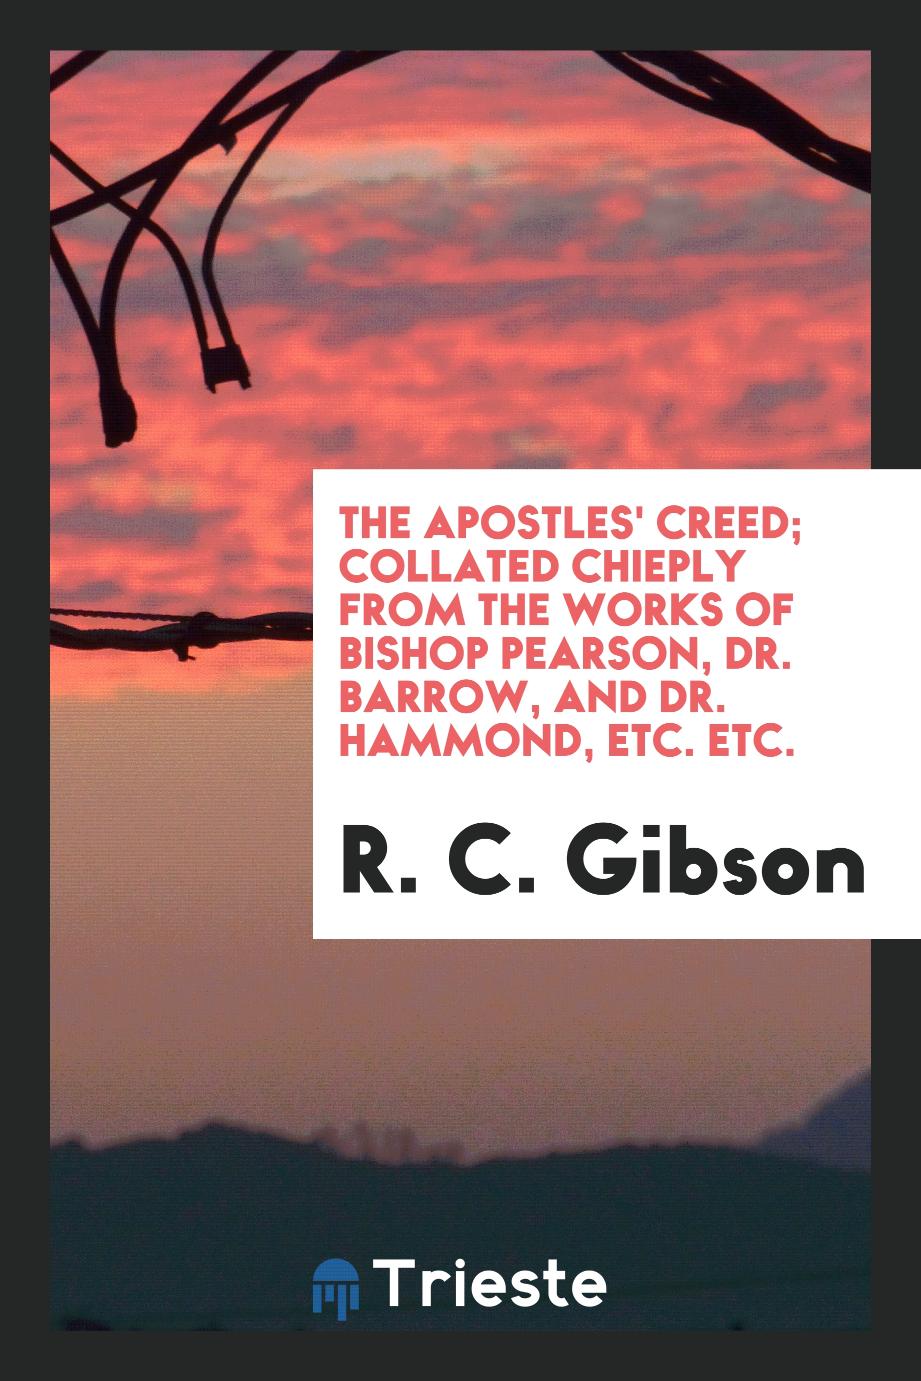 The Apostles' Creed; Collated Chieply from the Works of Bishop Pearson, Dr. Barrow, and Dr. Hammond, Etc. Etc.